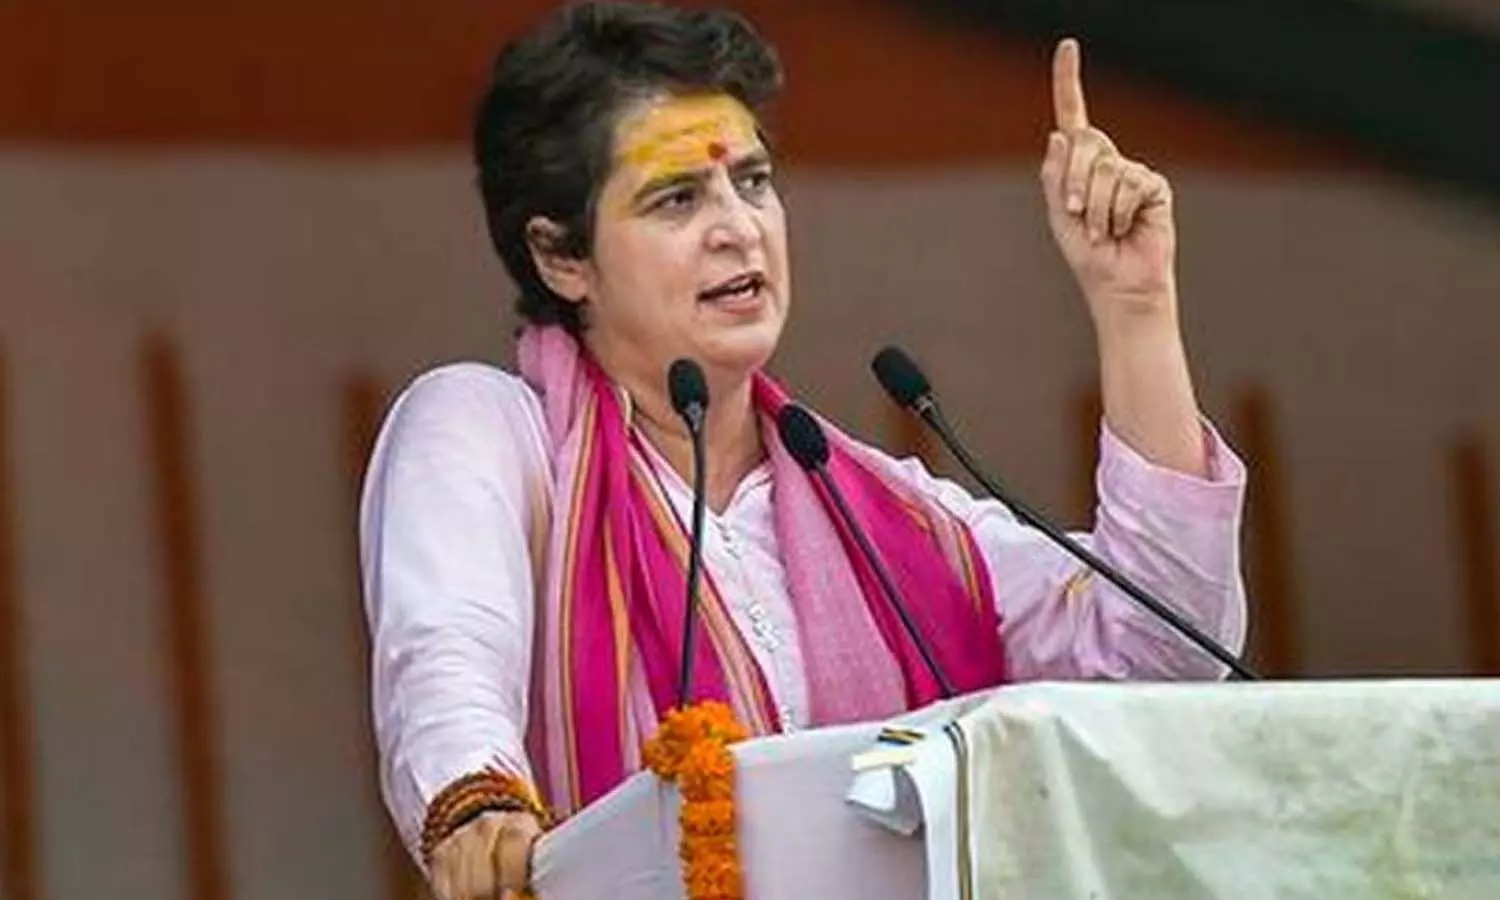 UP Election 2022: Priyanka Gandhi may contest from Lucknow Cantt seat, strategy is being made to make far-reaching impact